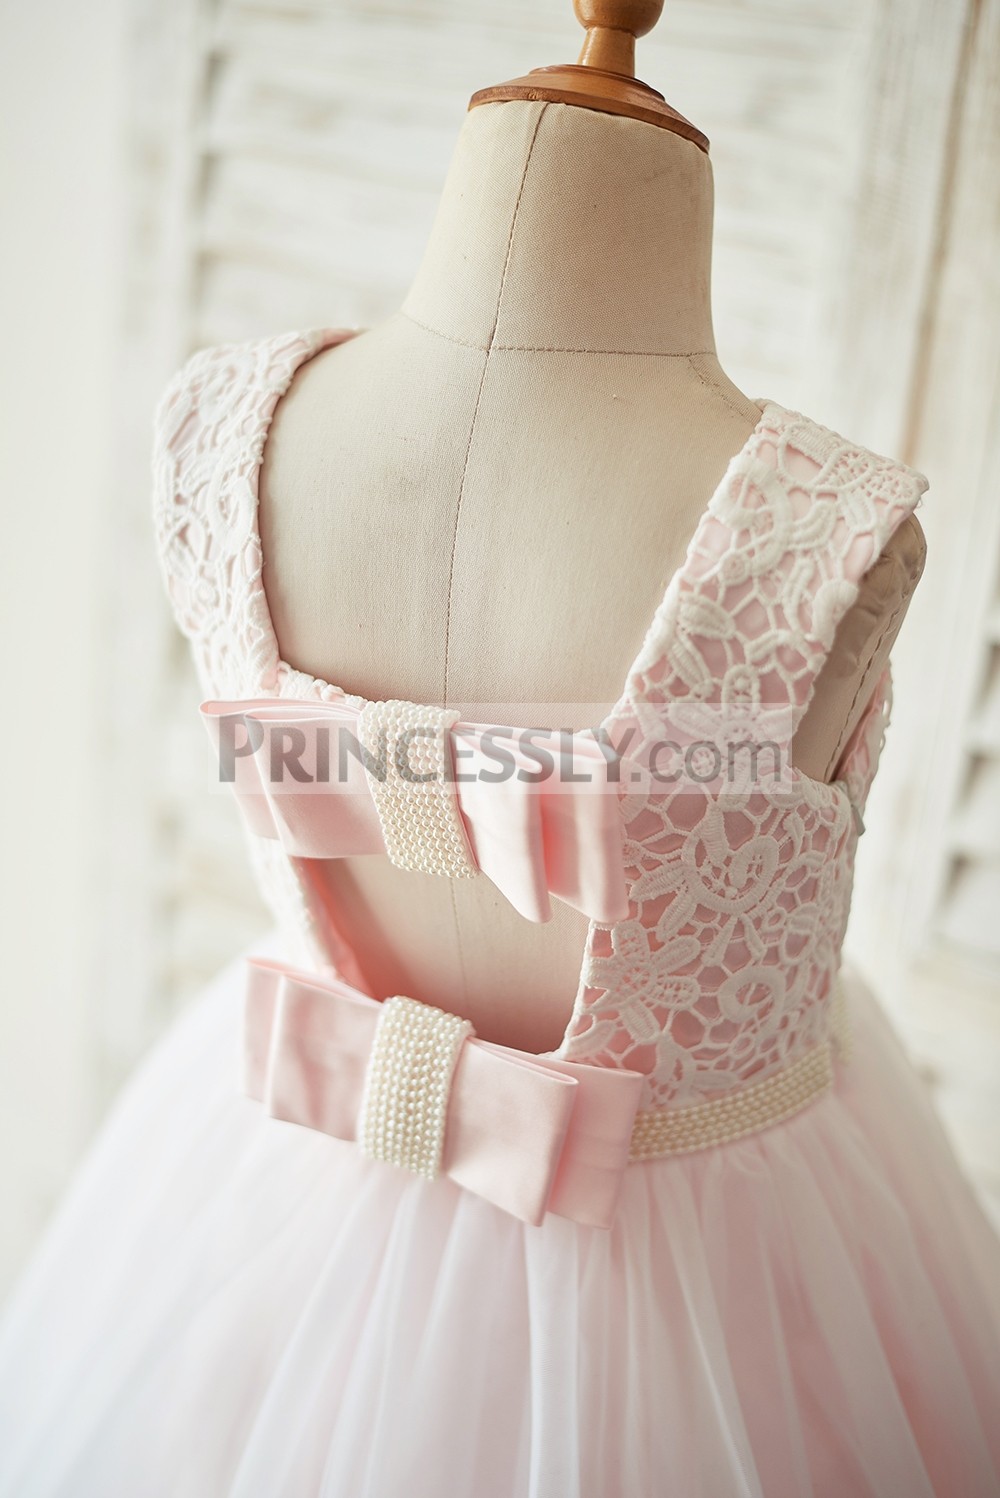 Open back with two pink bows